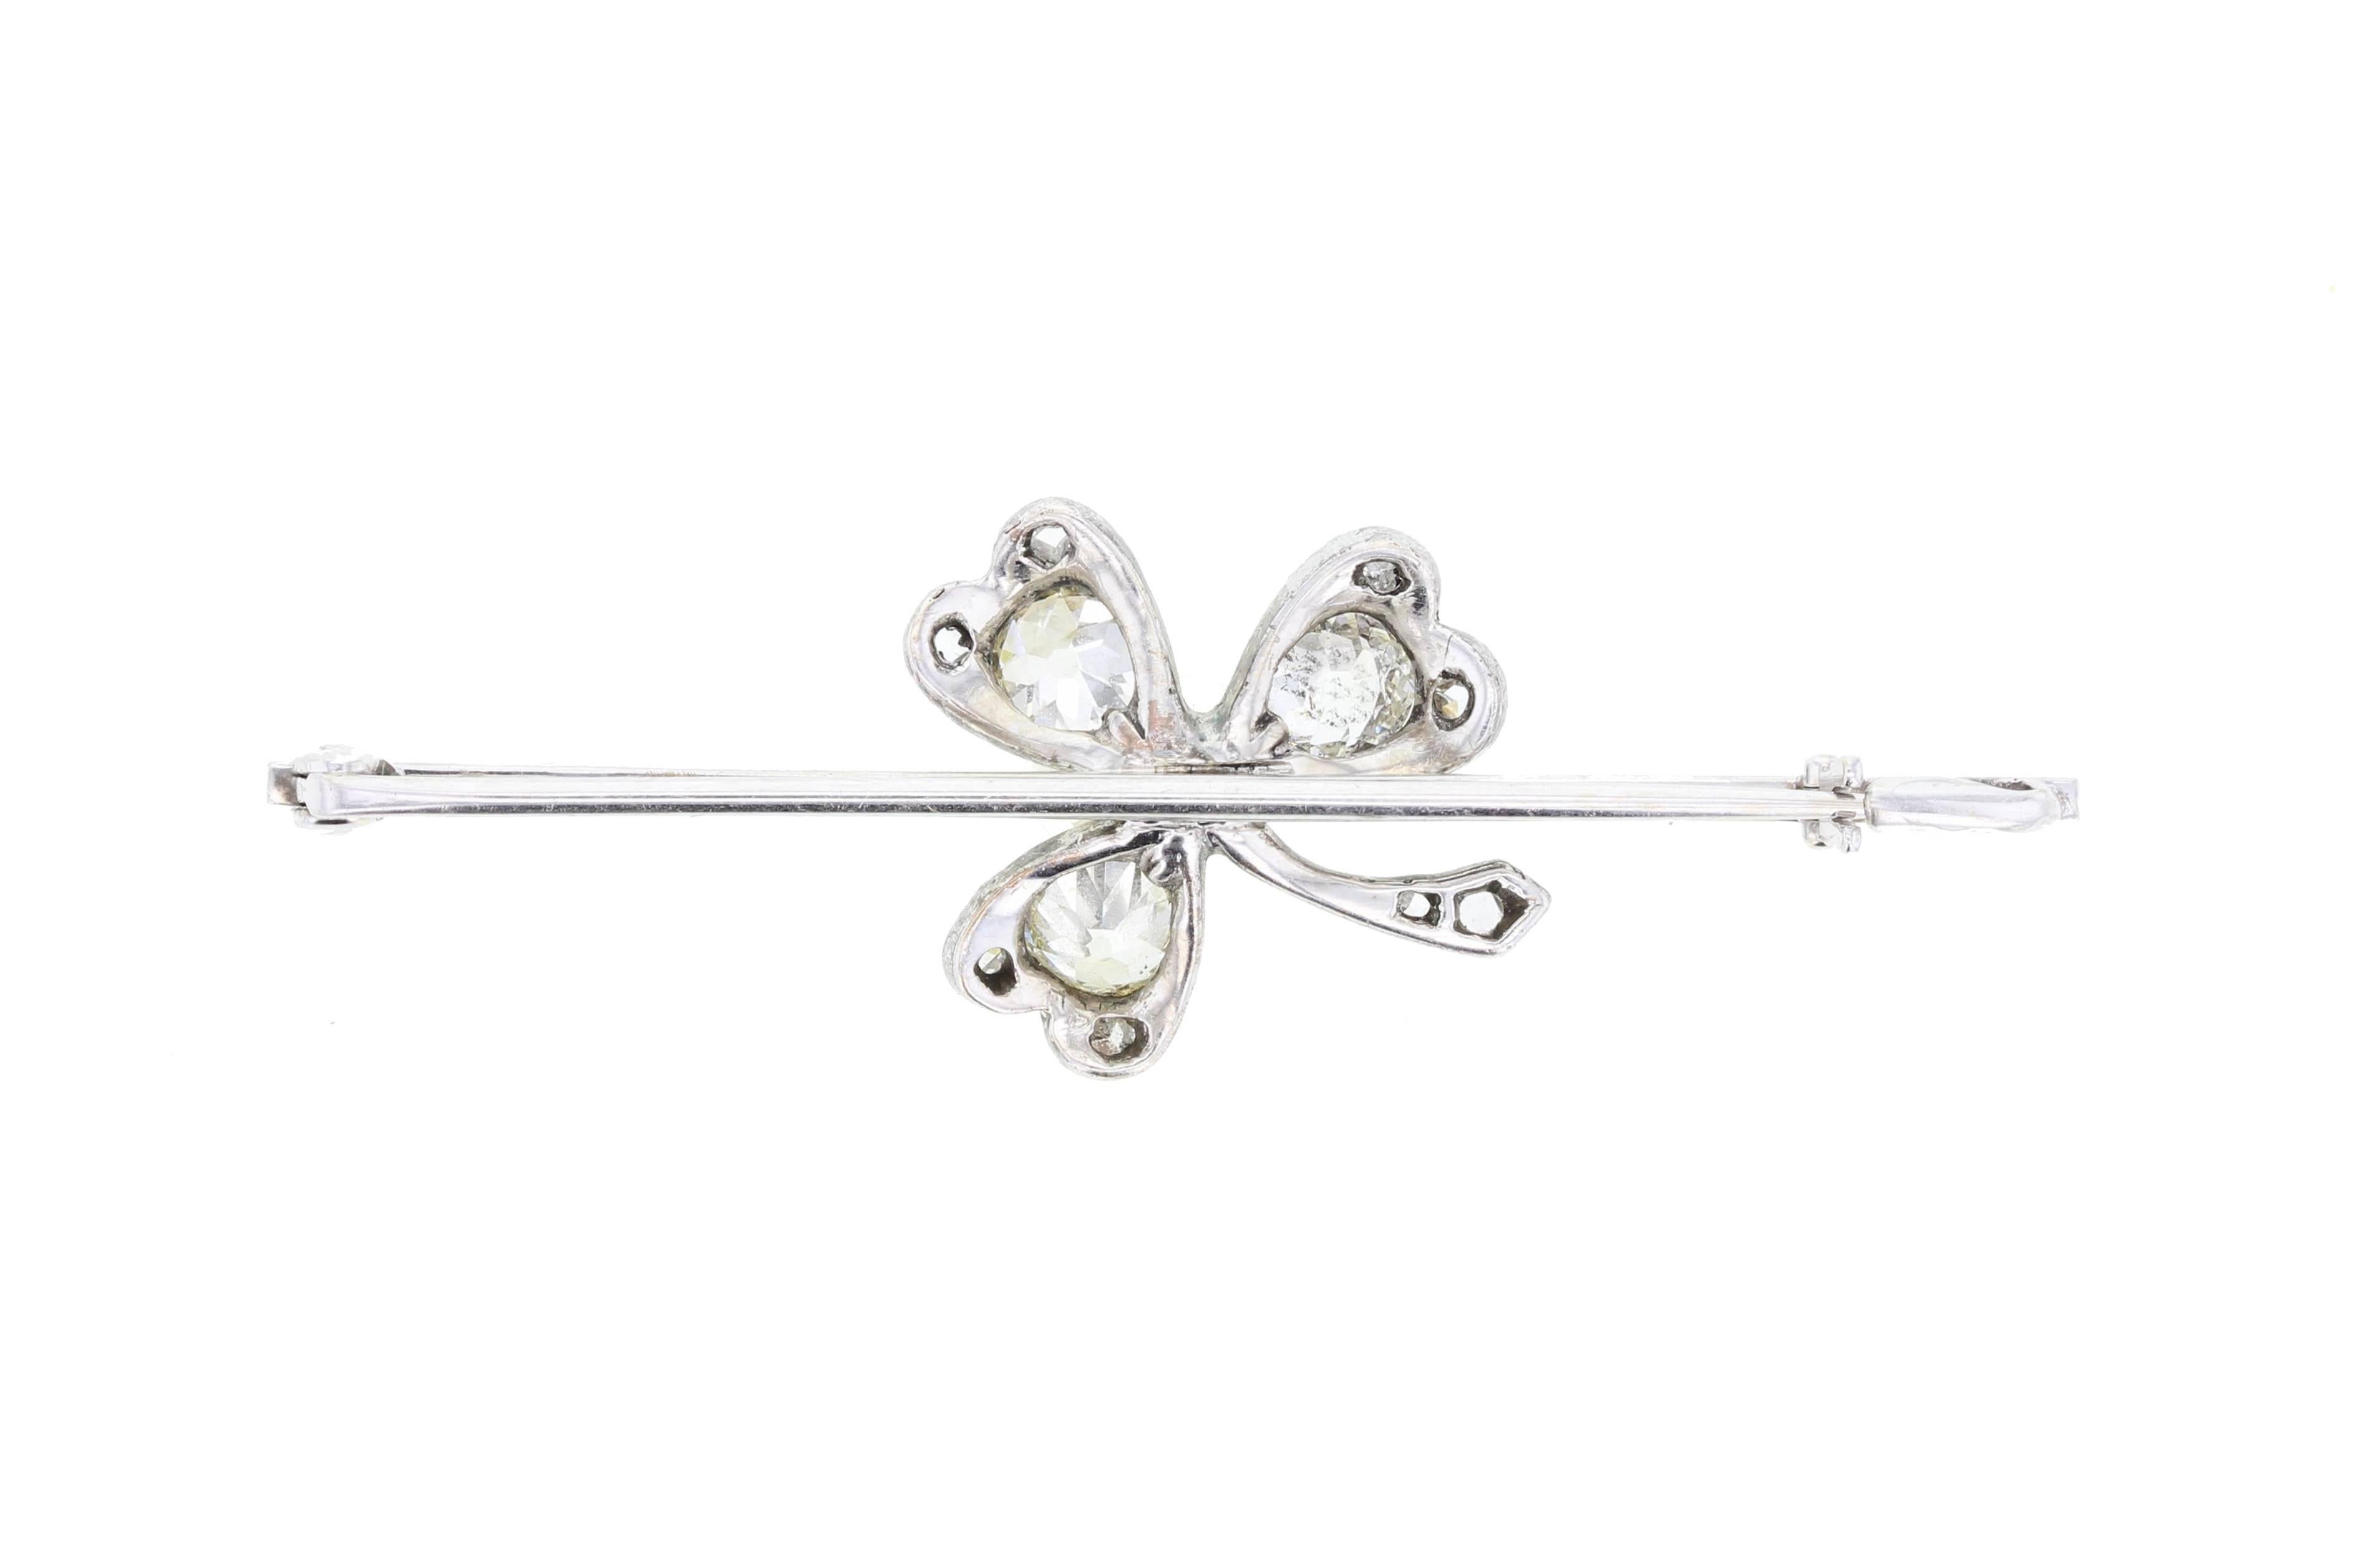 A wonderful antique bar brooch comprising a platinum clover, set with a central round white pearl, each leaf set with a single old-cut diamond and accented with smaller rose-cut diamonds. Mounted to a white-gold bar. Circa 1910.

Setting
Tests as